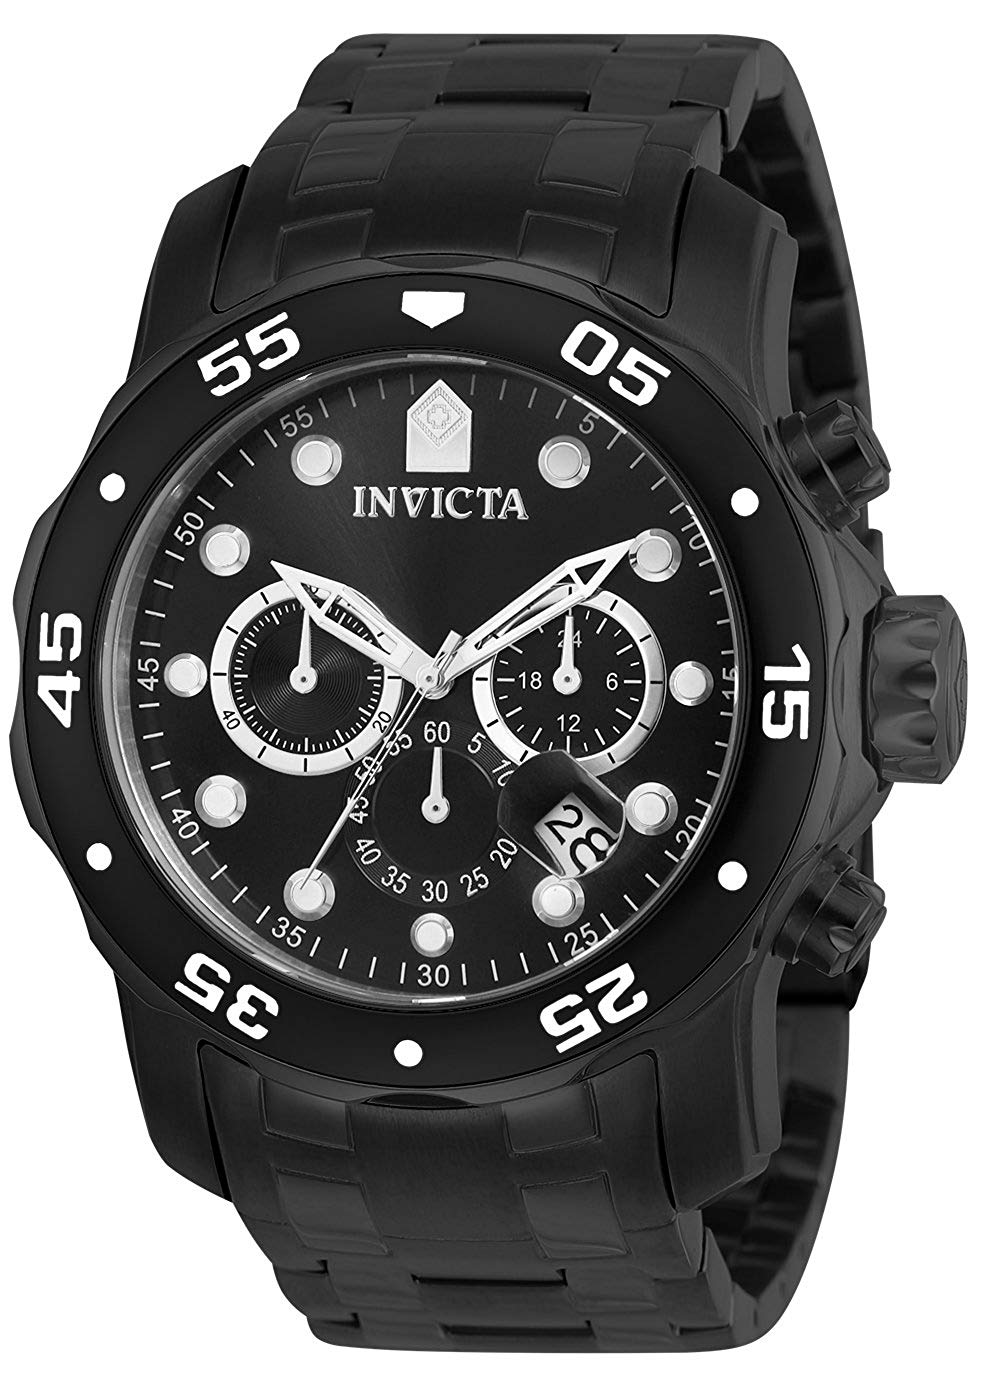 Invicta Pro Diver Black Stainless Steel Chronograph Mens Watch 0076